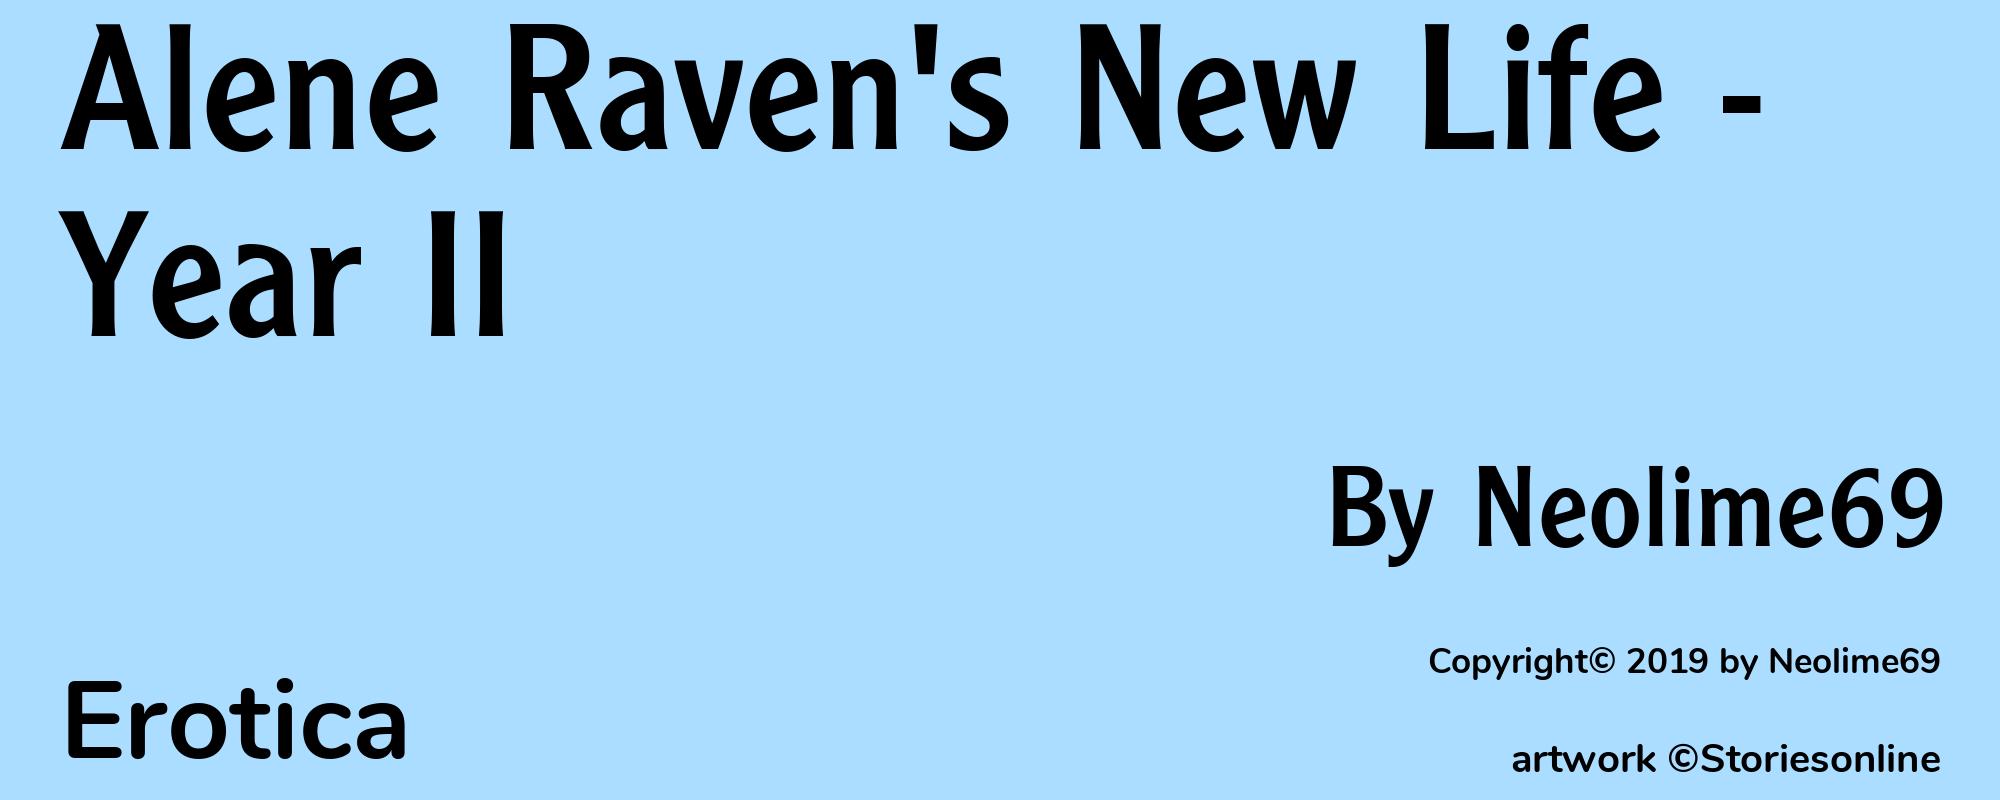 Alene Raven's New Life - Year II - Cover